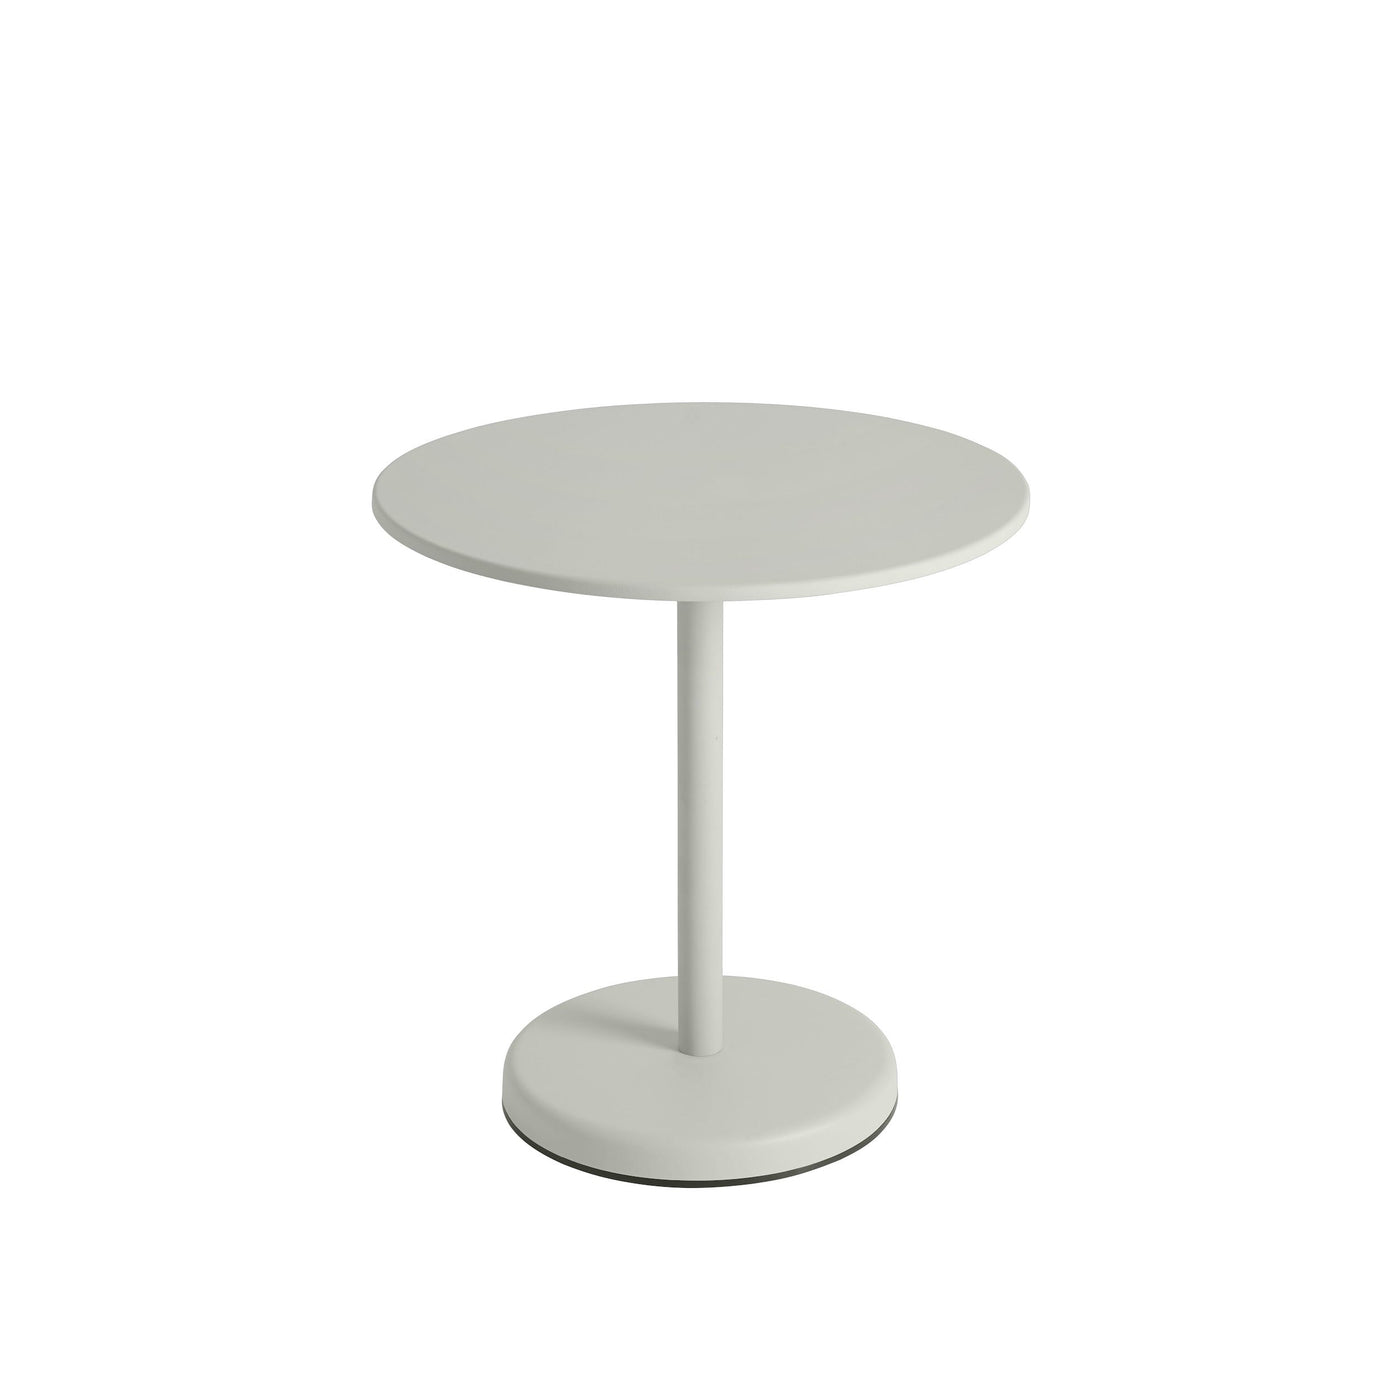 Muuto Linear Steel Cafe Table. Shop outdoor furniture at someday designs. #colour_grey